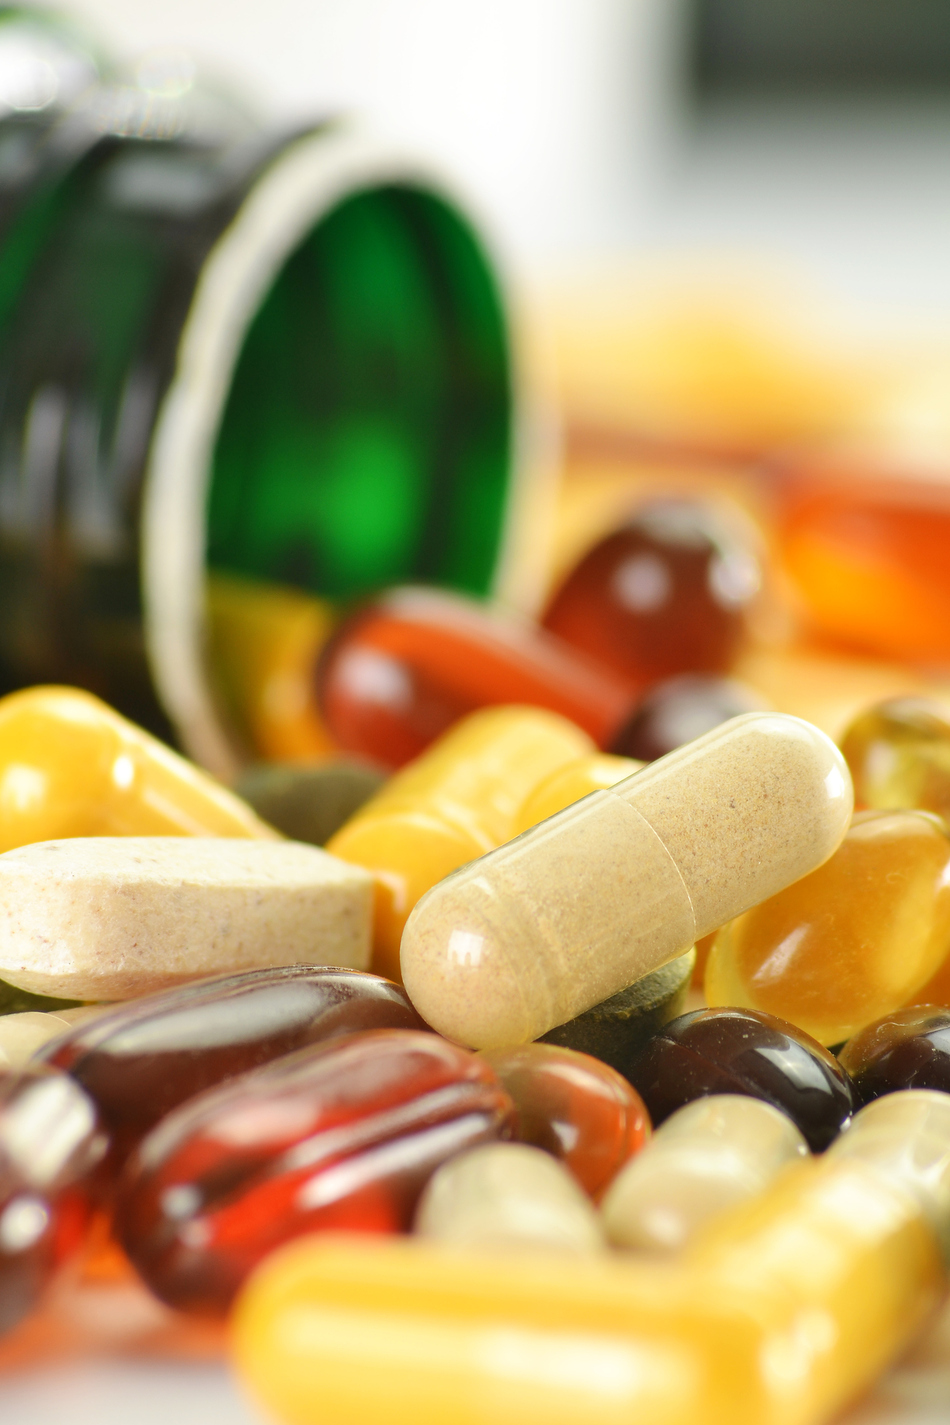 You Should Be Skeptical About Supplements